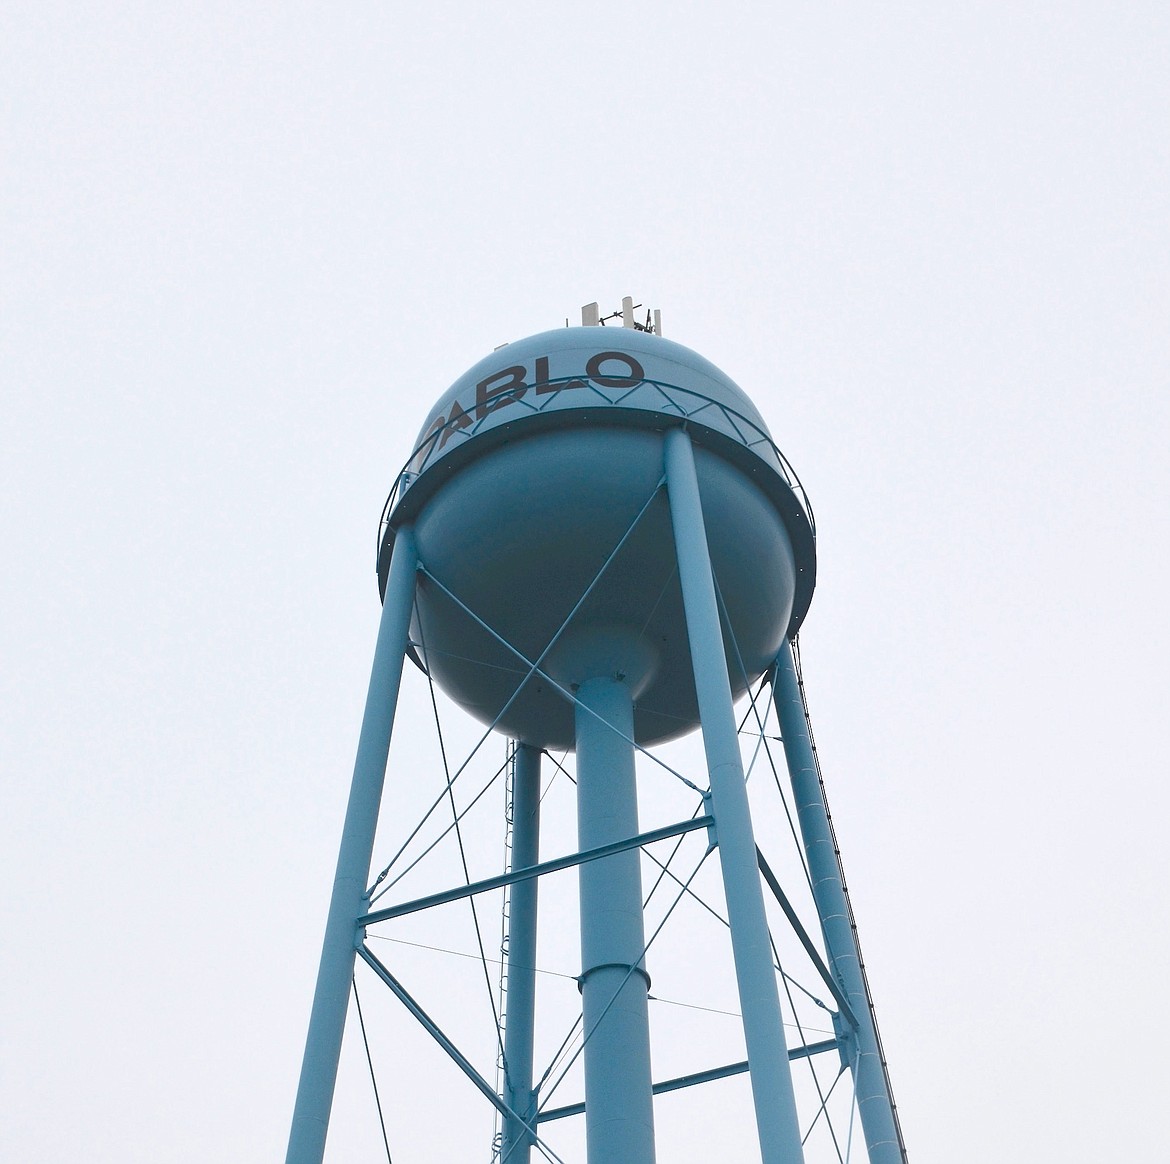 The Pablo Water and Sewer District announced before Thanksgiving that the city's water system was contaminated with e. coli bacteria and advised residents to boil water before using. (Kristi Niemeyer/Leader)